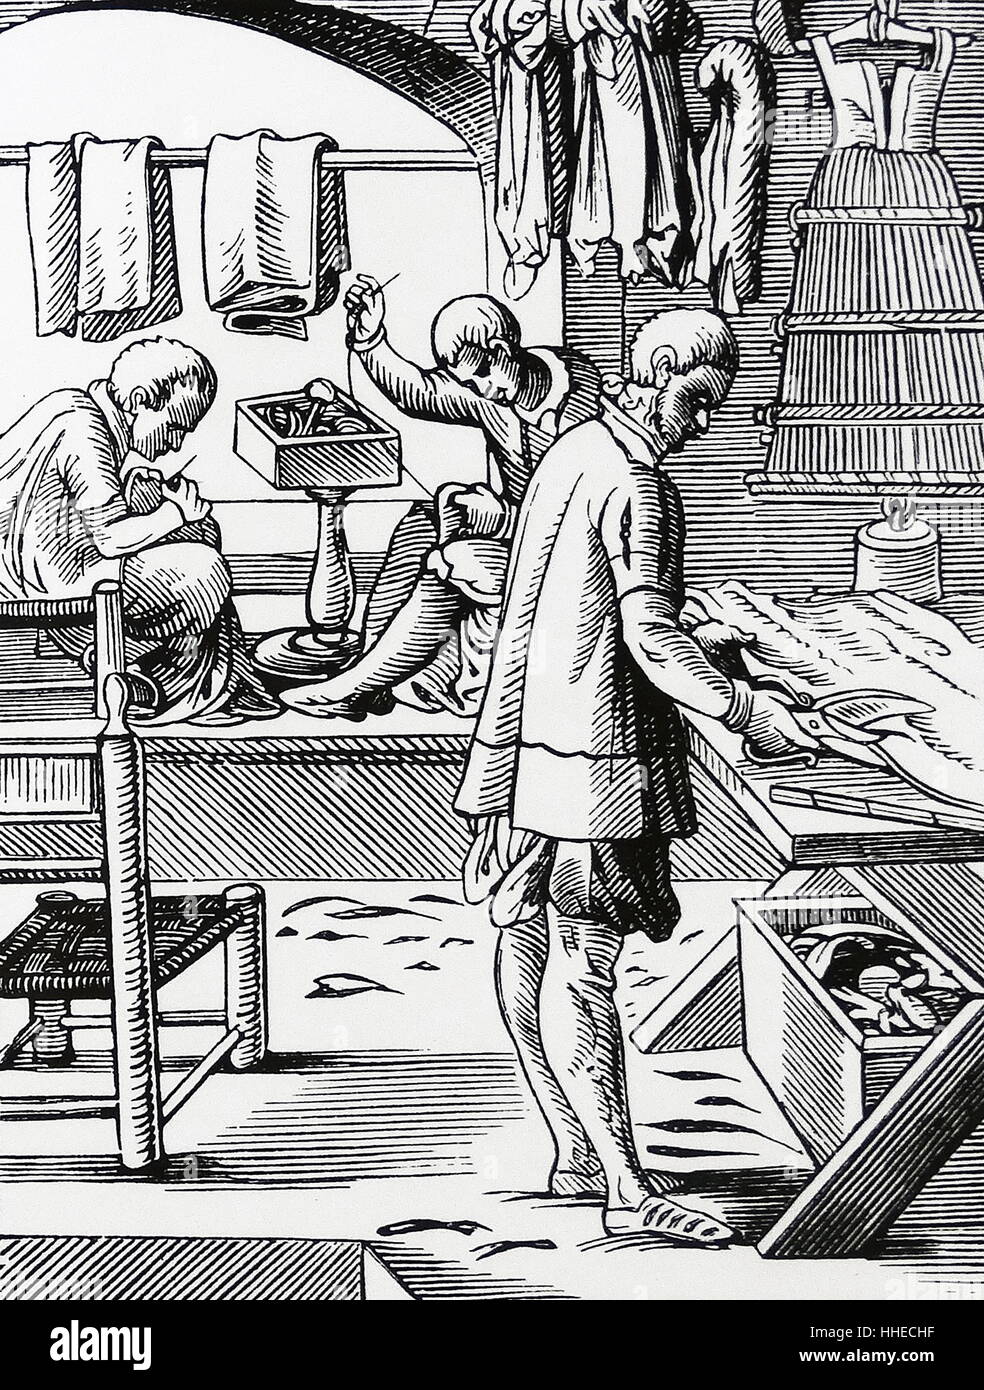 The tailor. From a 16th century woodcut by Jost Amman Stock Photo